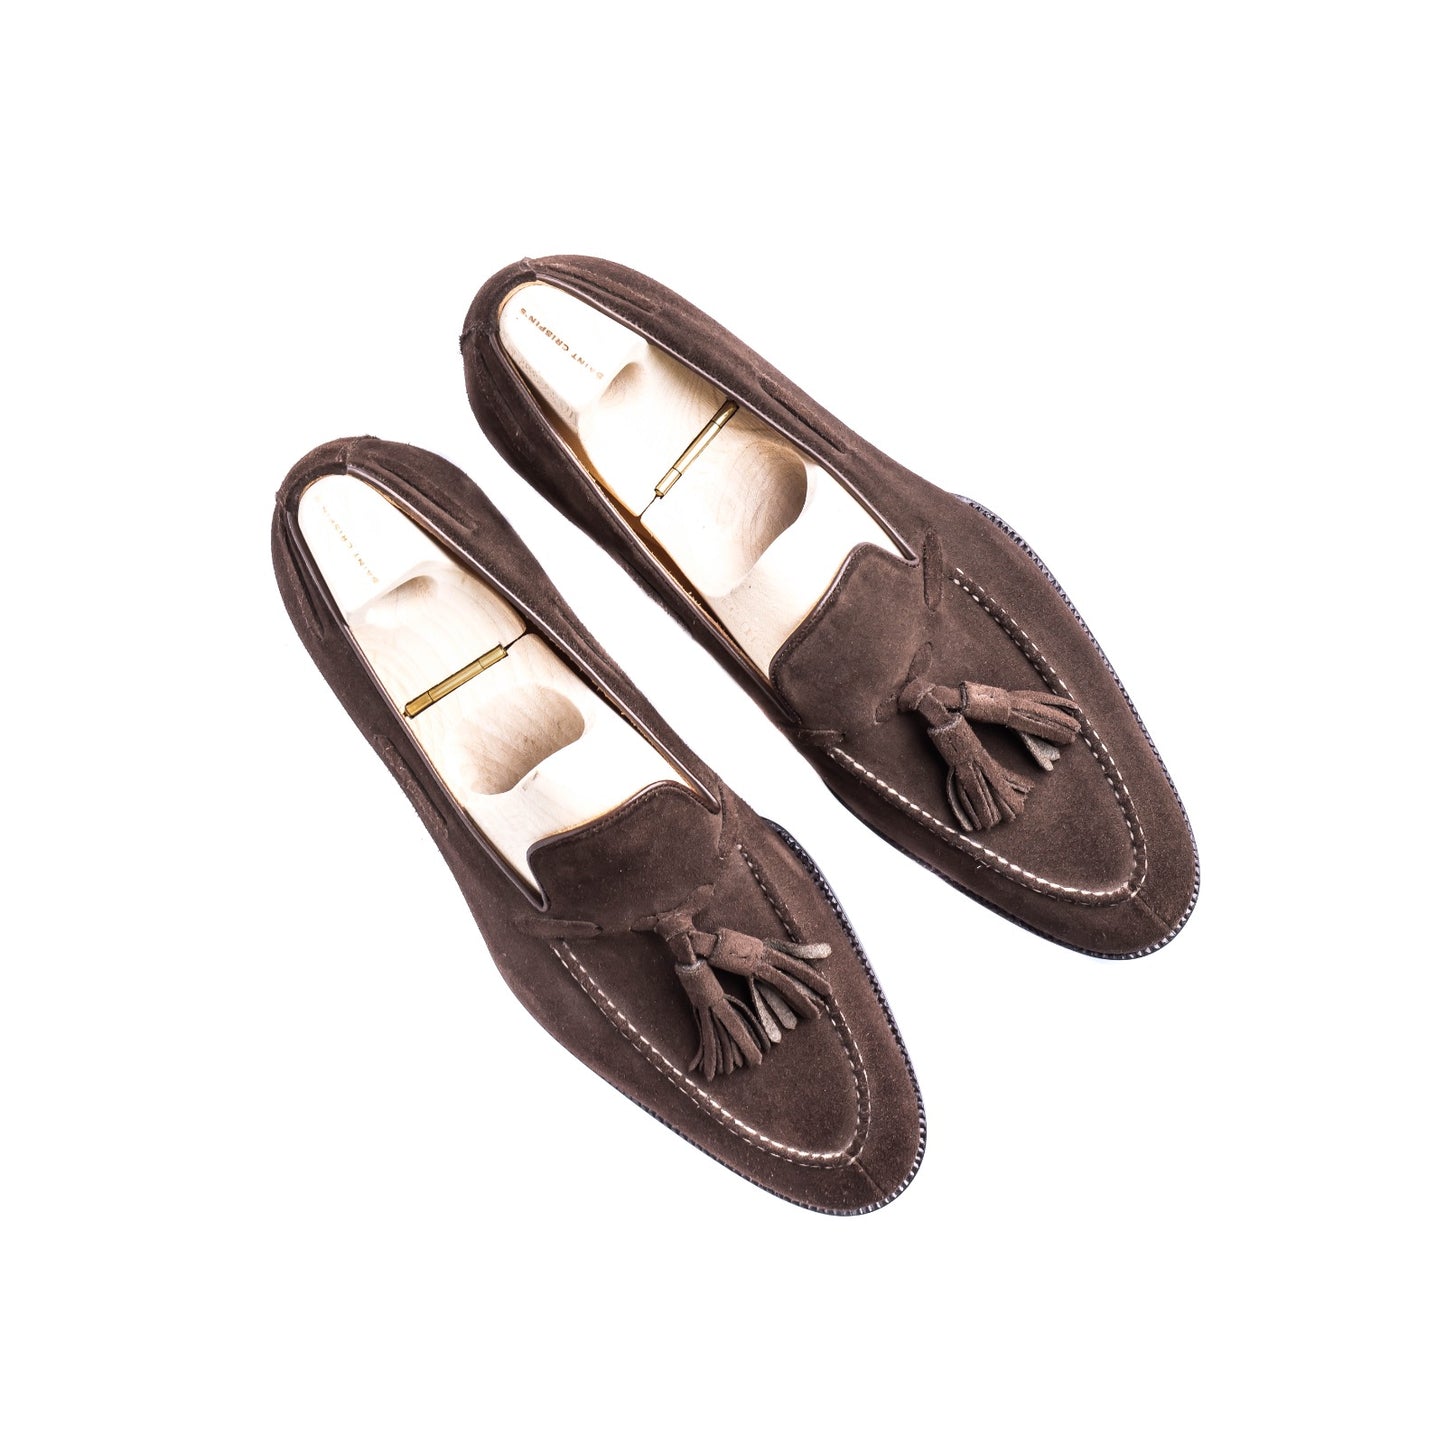 Loafer with hand stitched apron and tassels